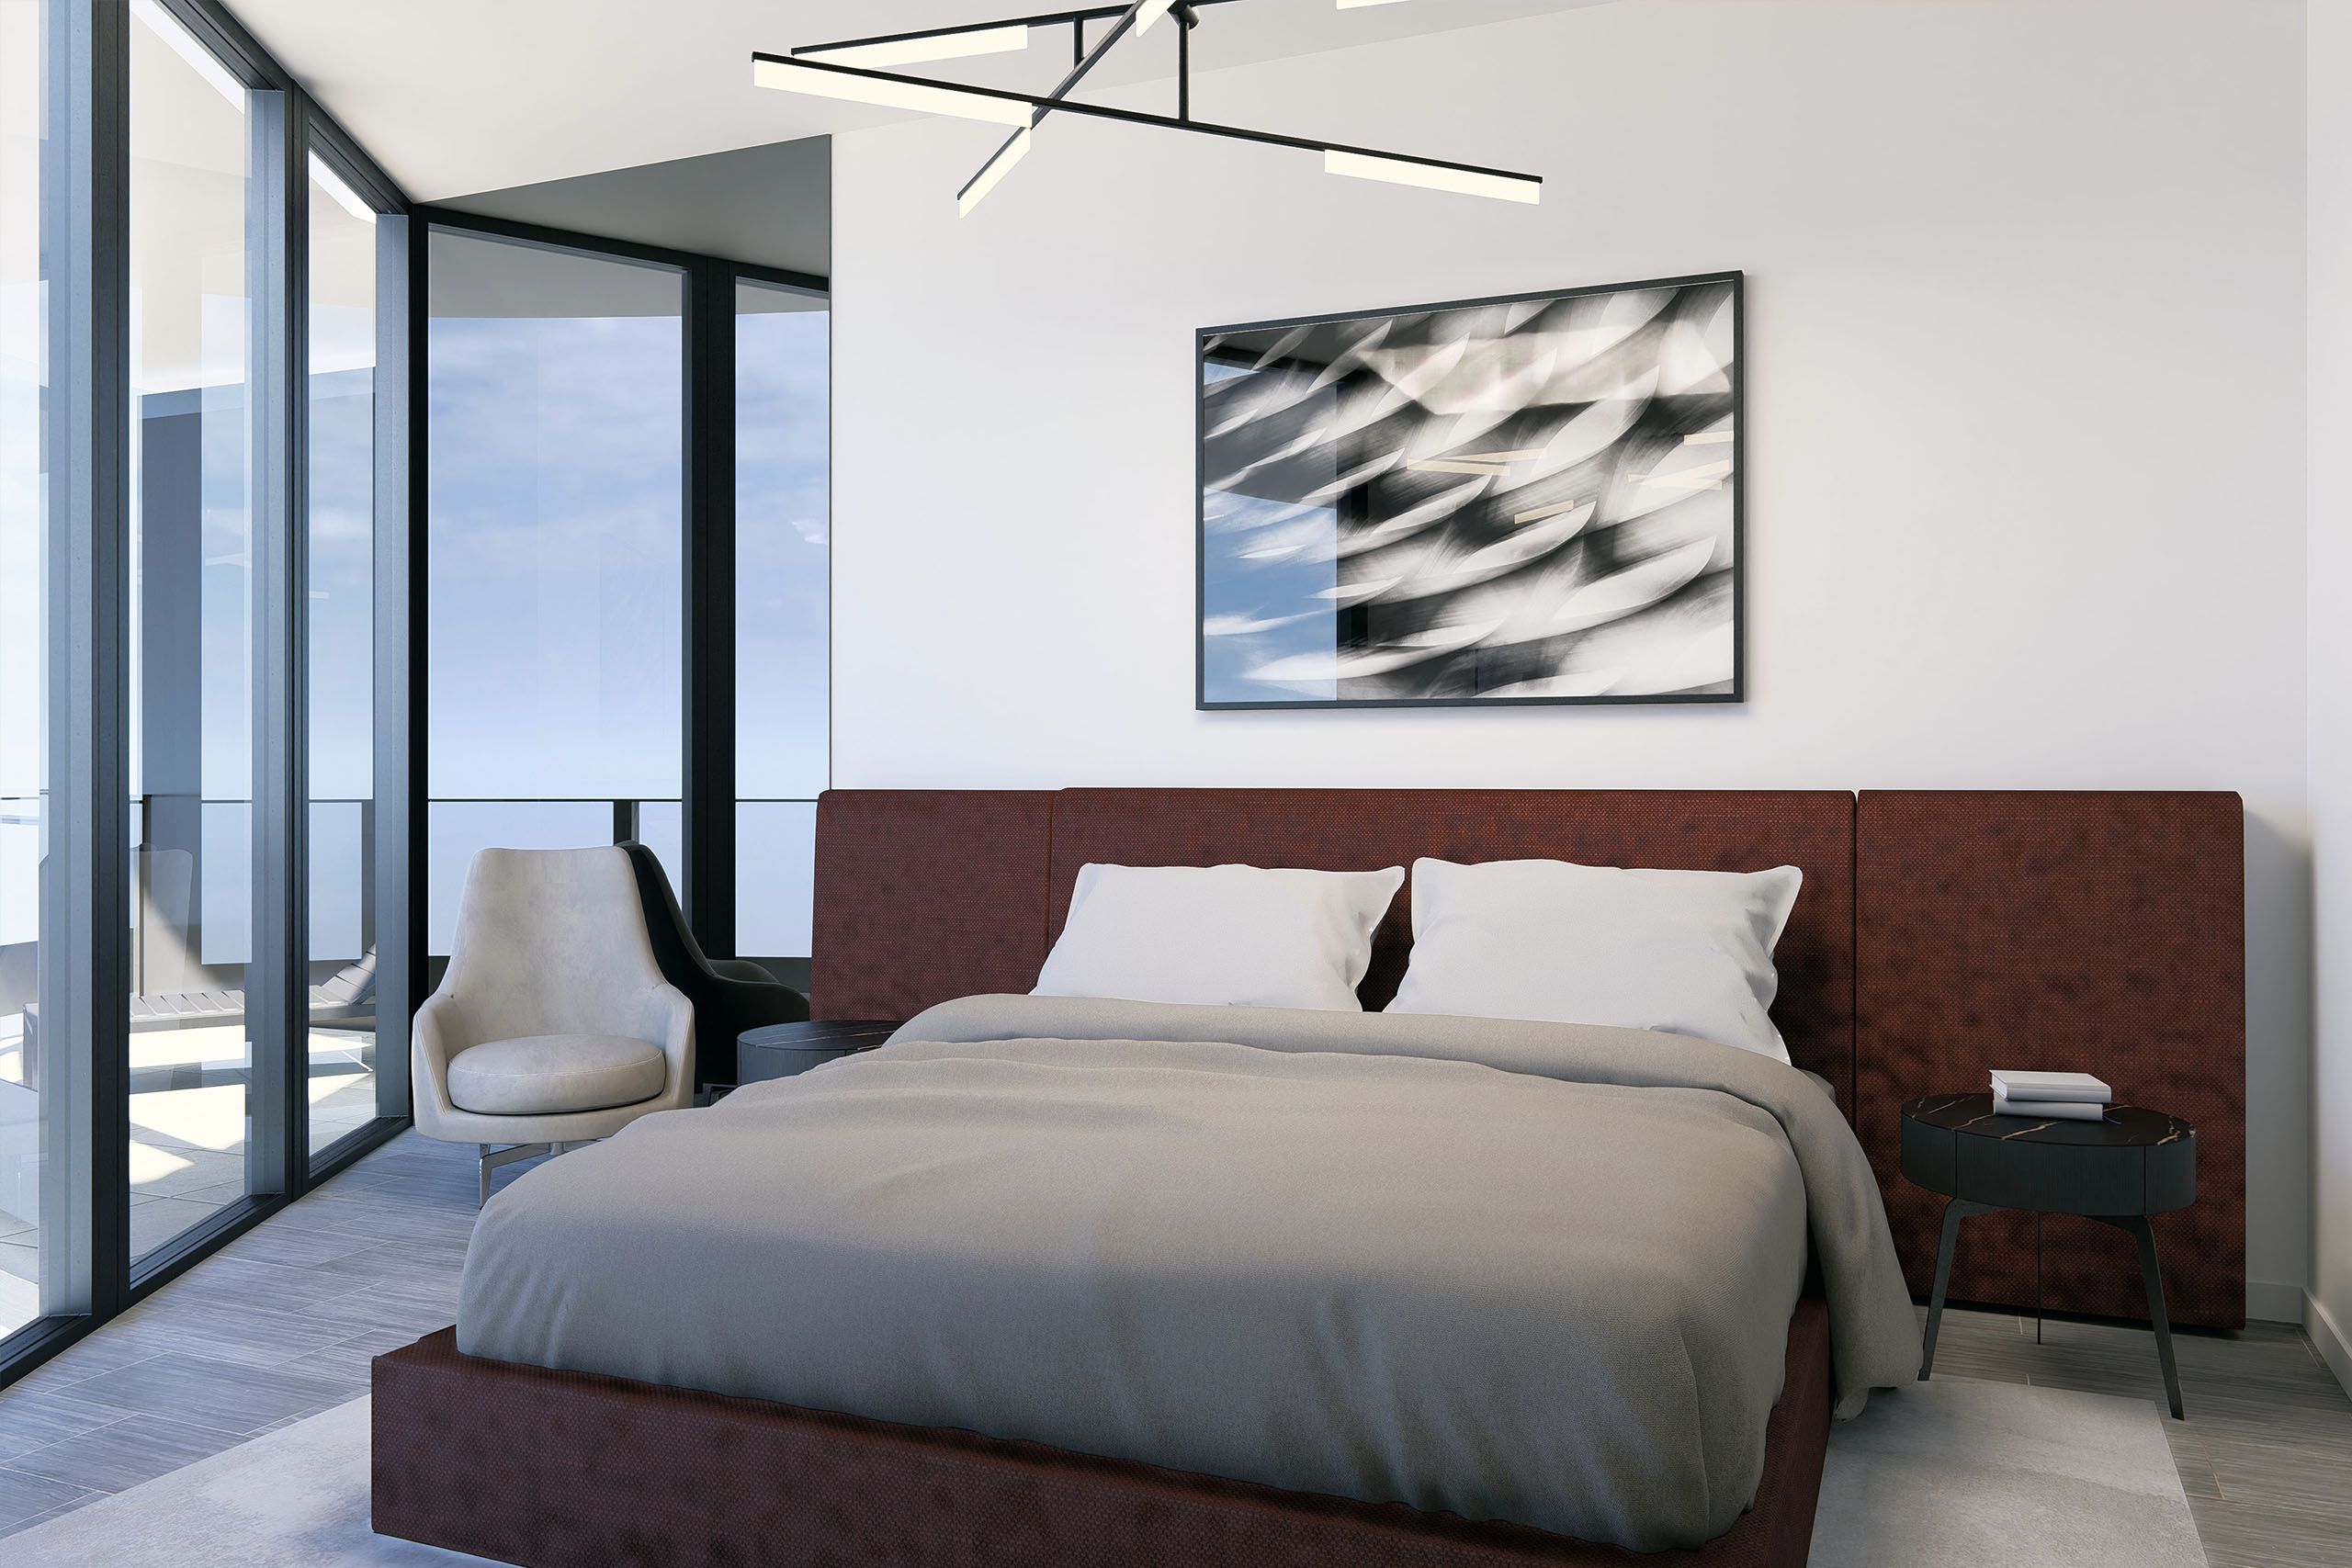 Contemporary and minimalist interior design with asymmetrical bed wall with smoke mirror on the left side, burgundy bed with long headboard, white rug, white walls, white lounge chair, black wood rounded nightstands and black and white abstract artwork.